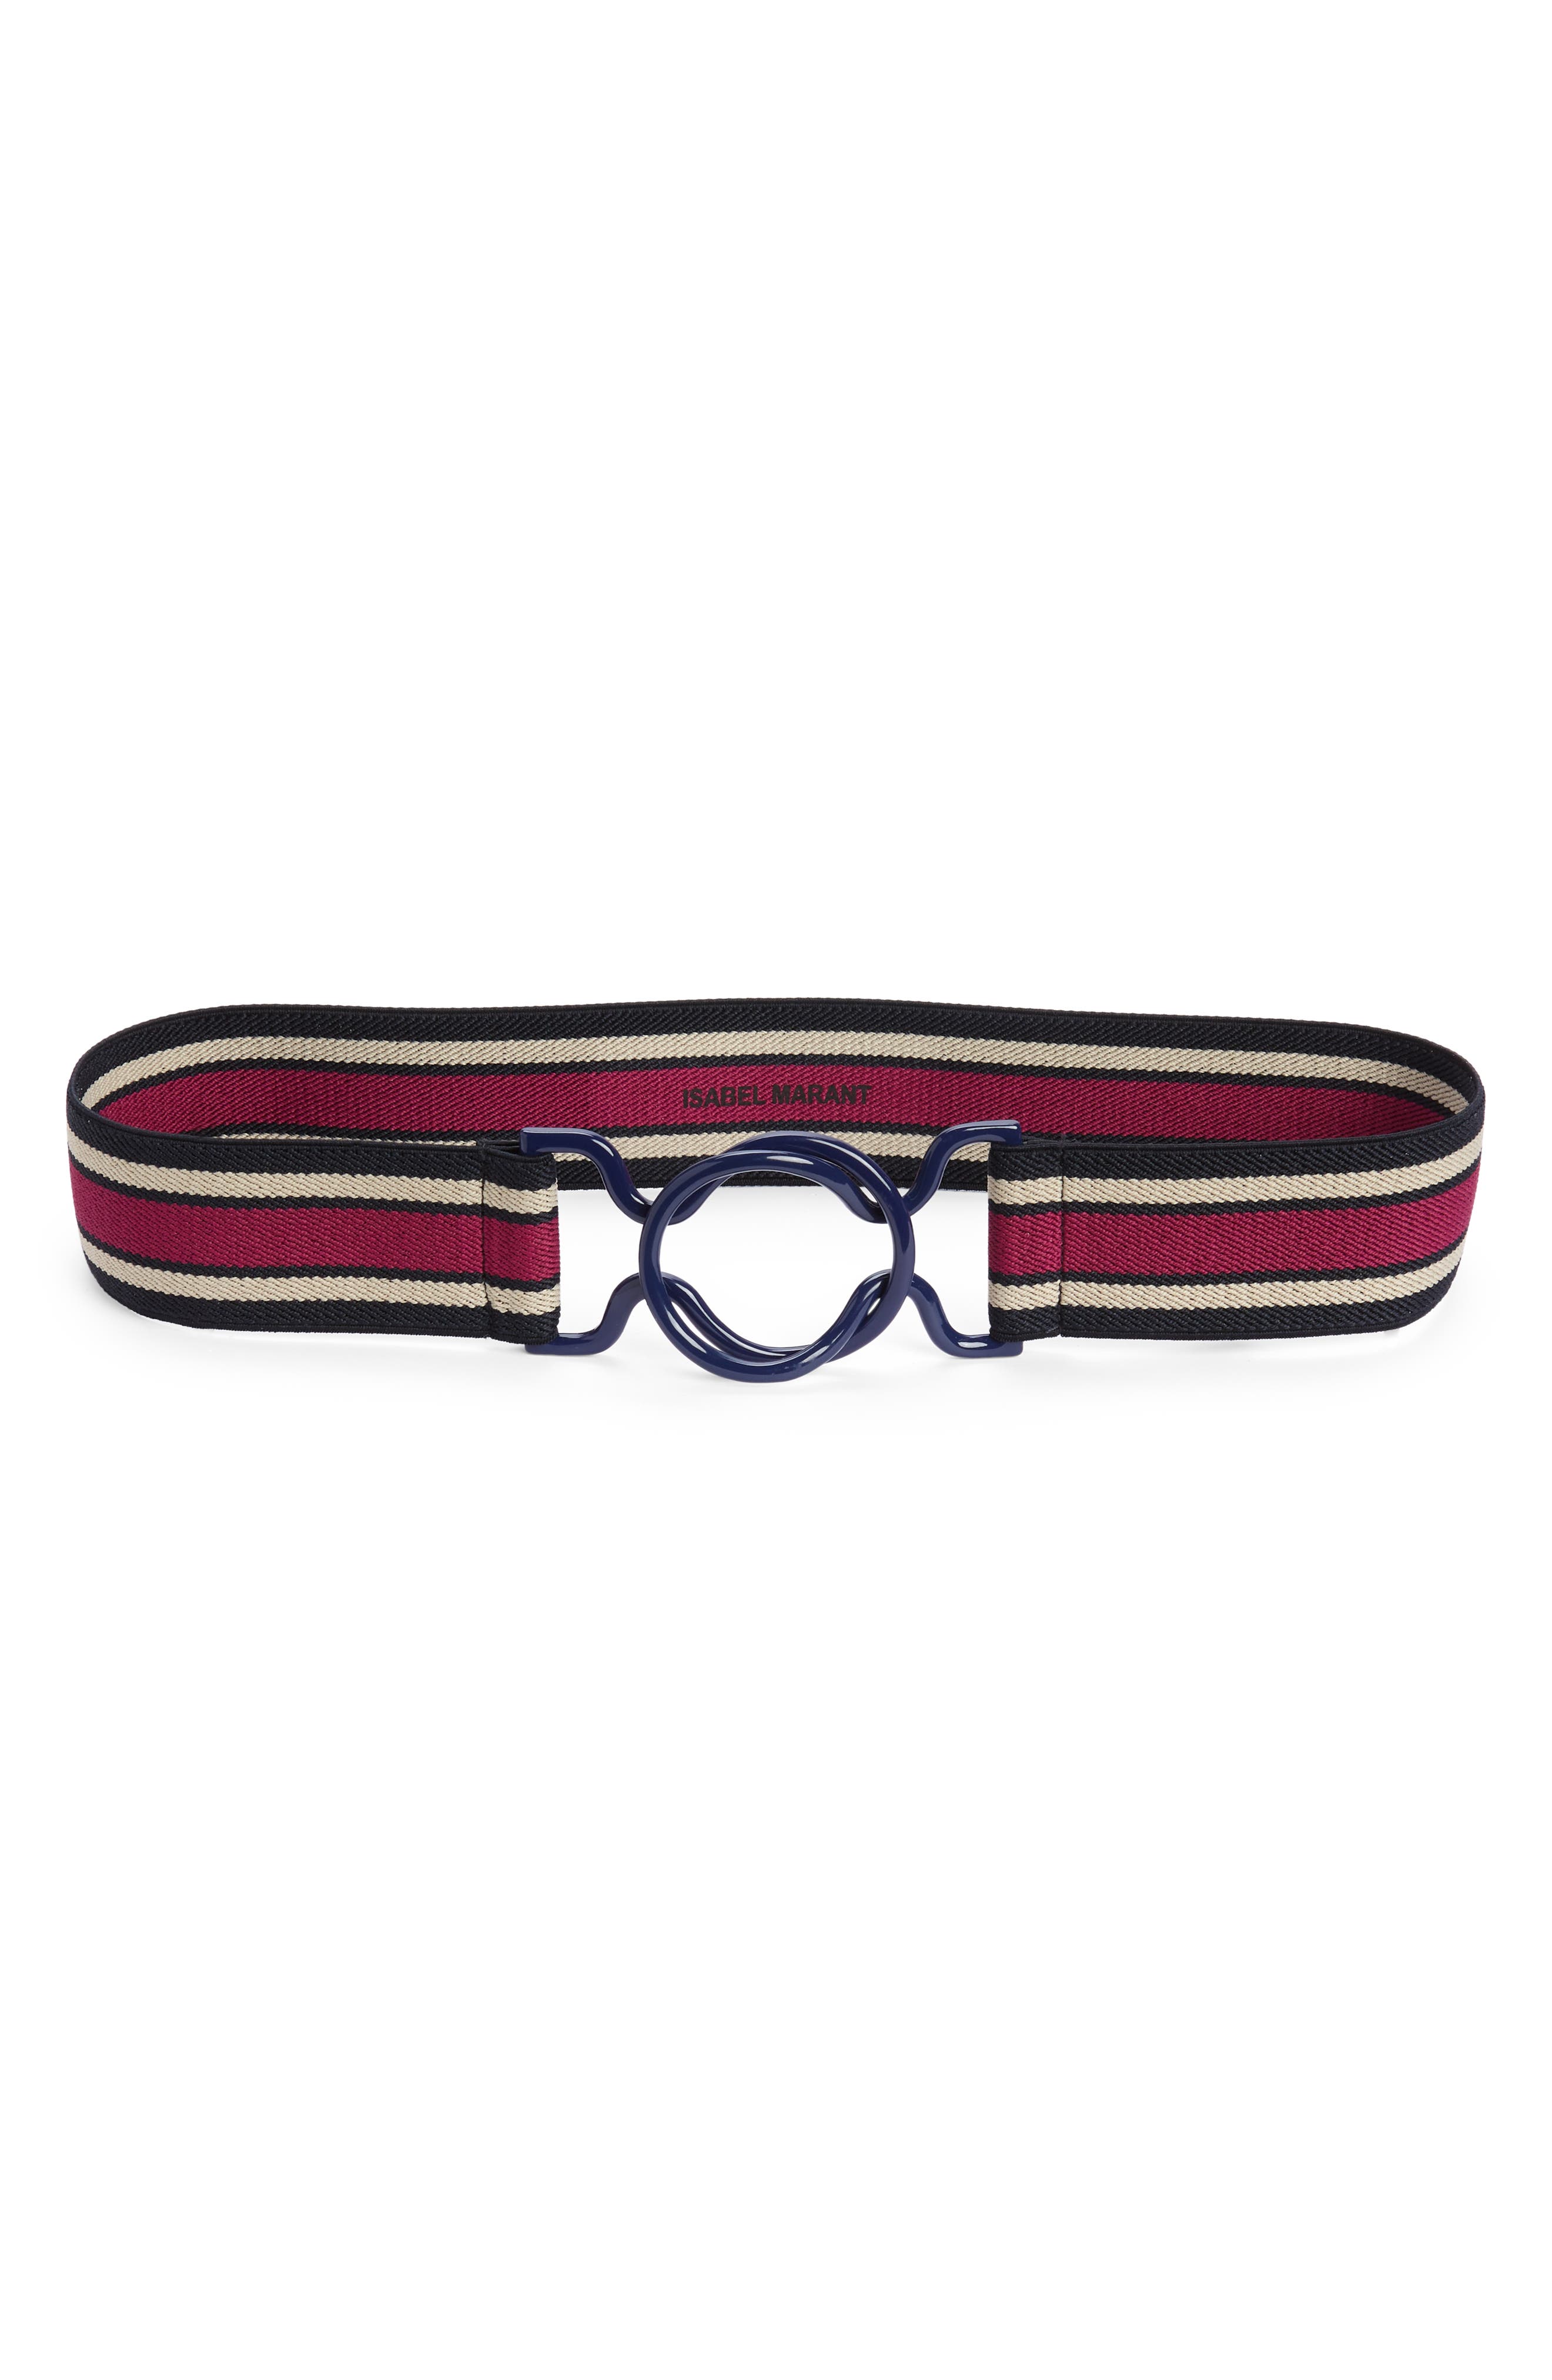 Isabel Marant Elie Stretch Belt in Faded Night at Nordstrom, Size Small